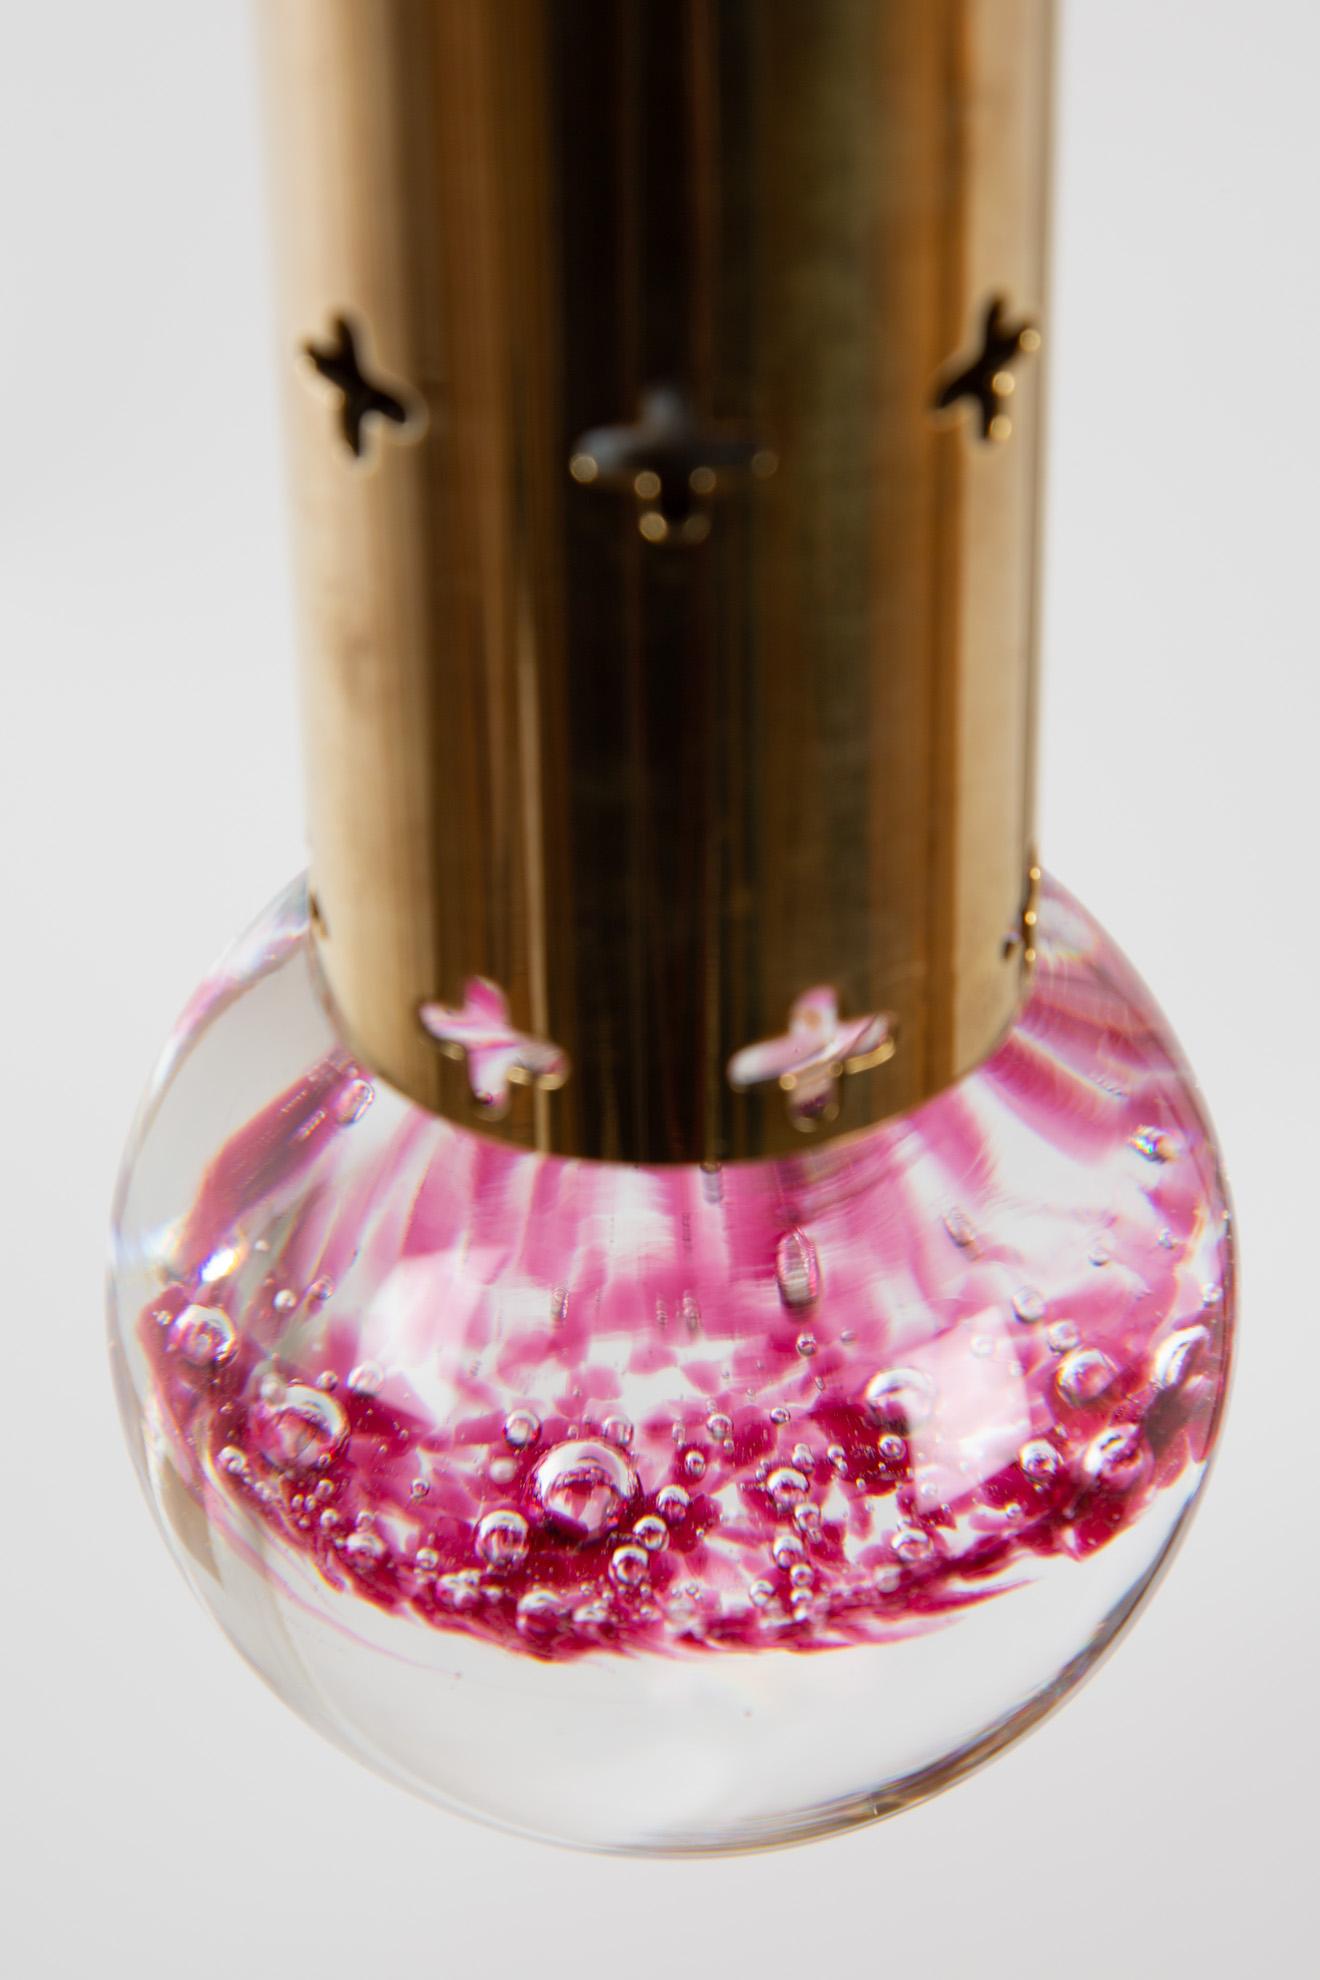 Hans Agne Jakobsson pendant brass with glass drop. In the glass drop is pink colored glass enclosed. It is like a landscape. The brass tube has some stars. The light is twinkling through the stars.